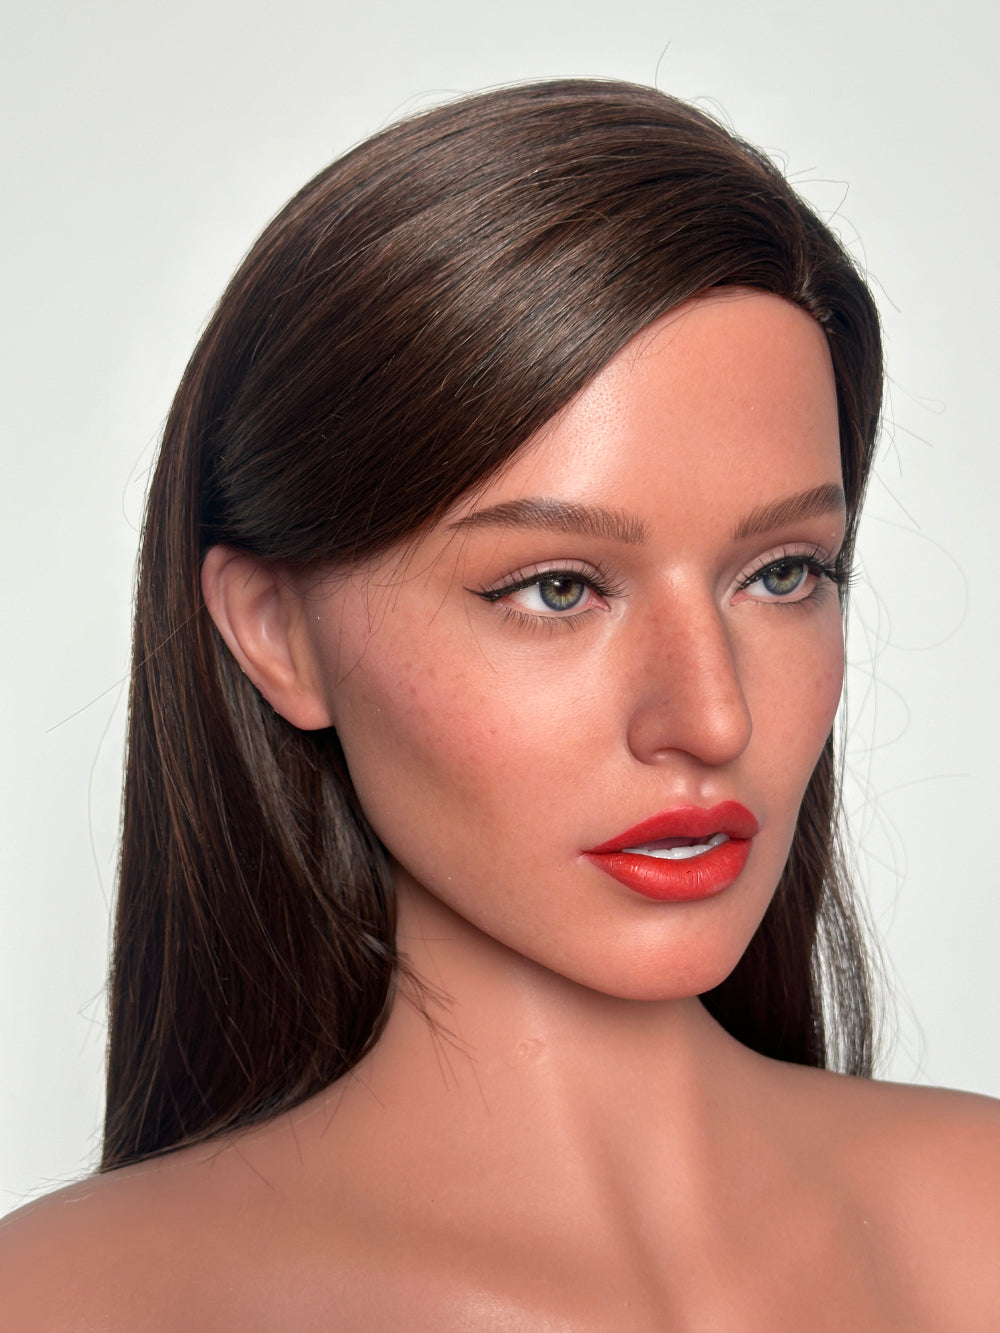 Zelex Doll SLE Series 171 cm C Silicone - ZXE212-1 Movable Jaw